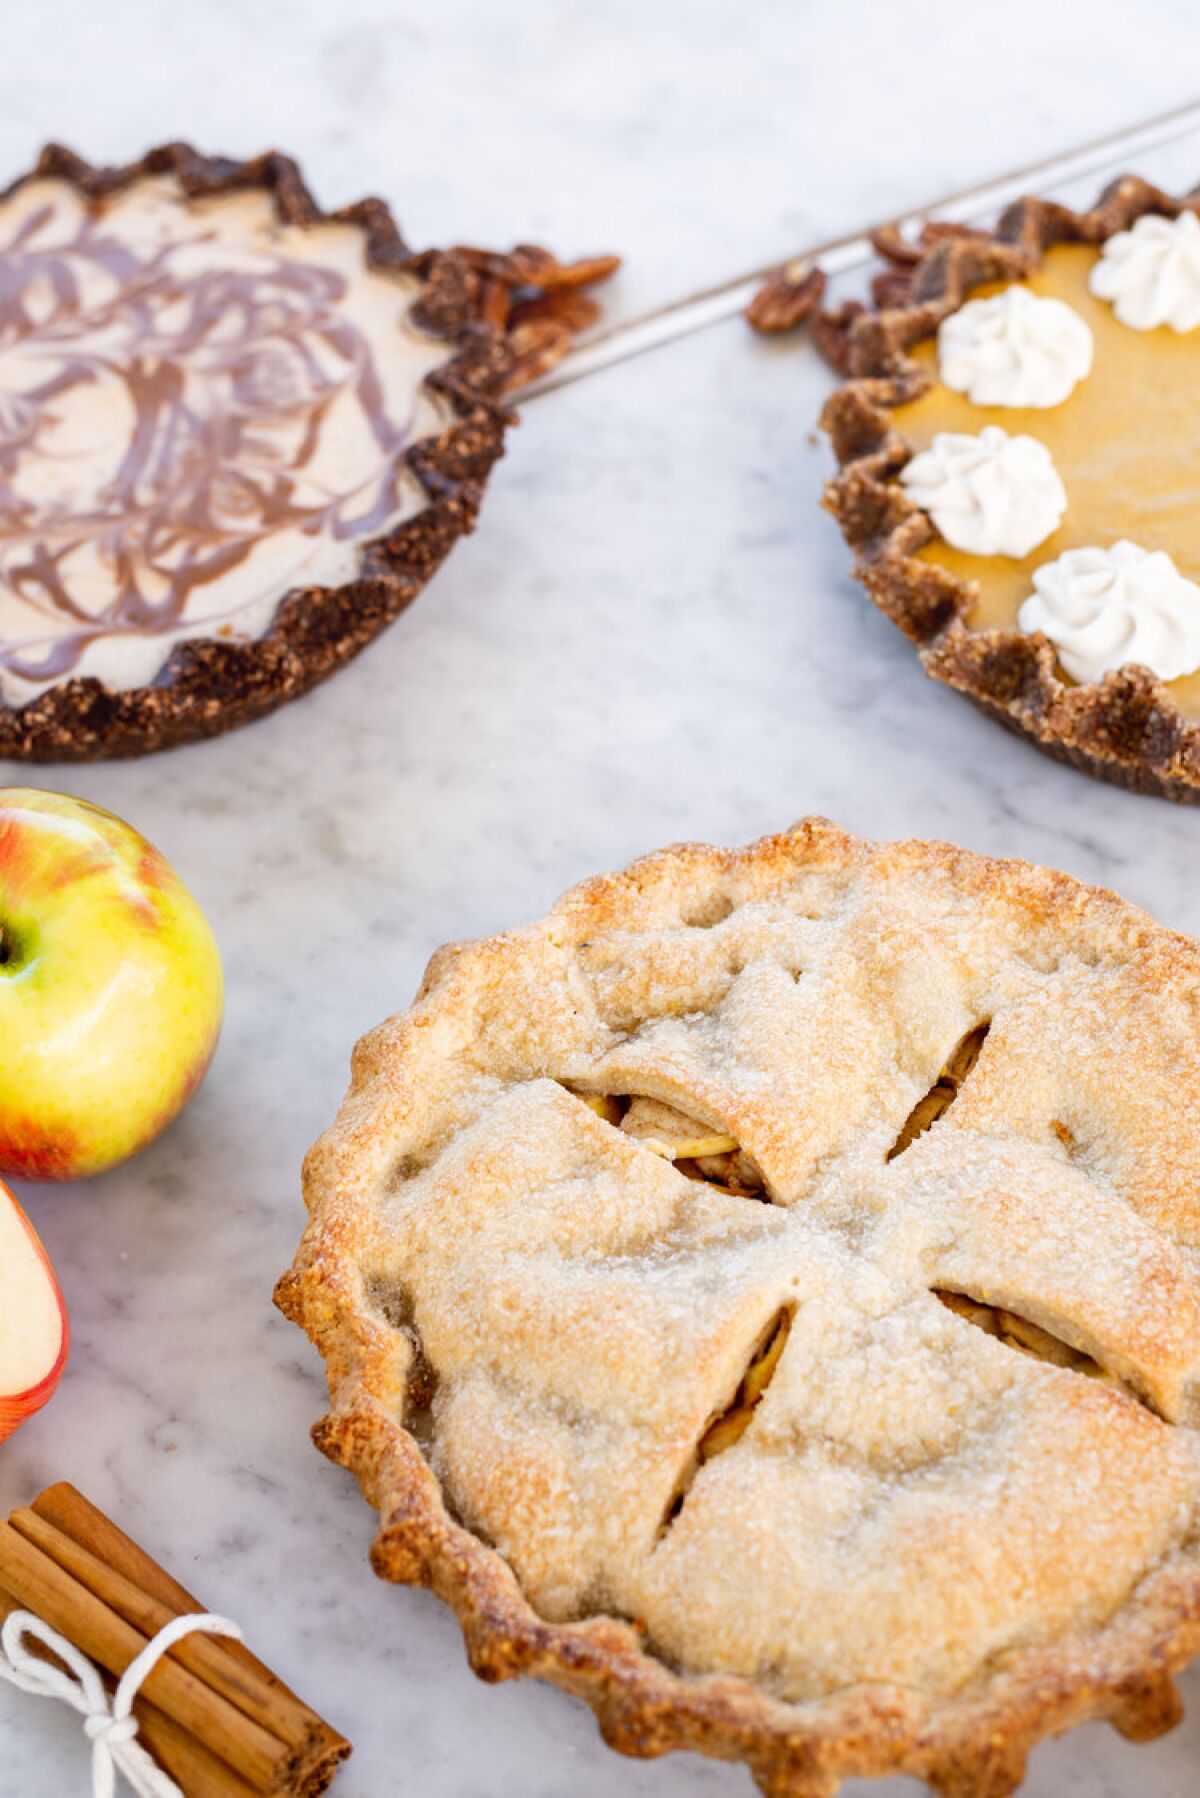 Baked apple, chocolate coconut cream and pumpkin pies from Café Gratitude